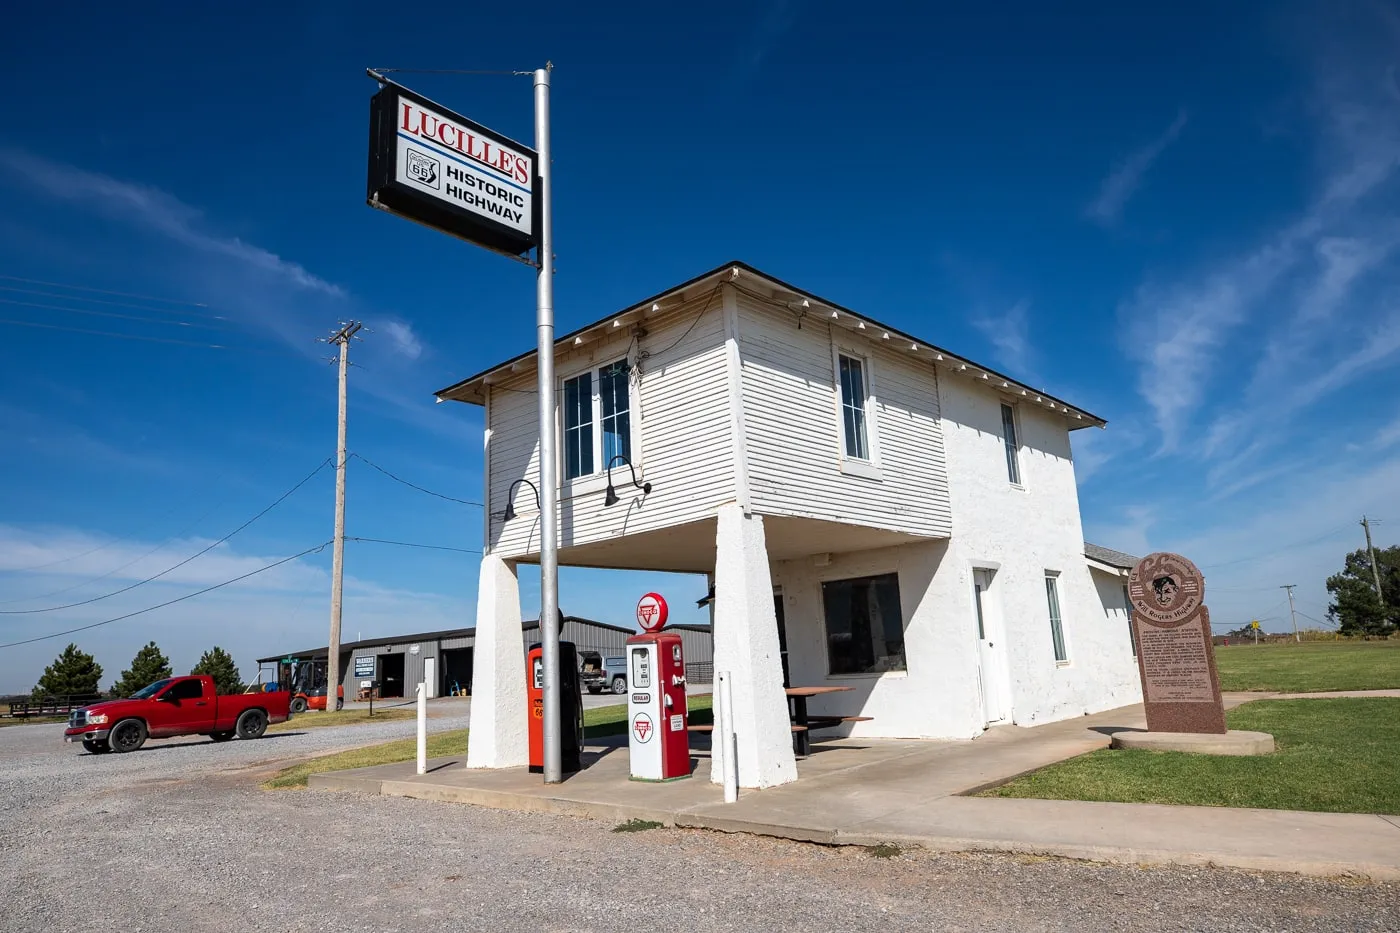 Lucille's Historic Highway Gas Station in Hydro, Oklahoma on Route 66